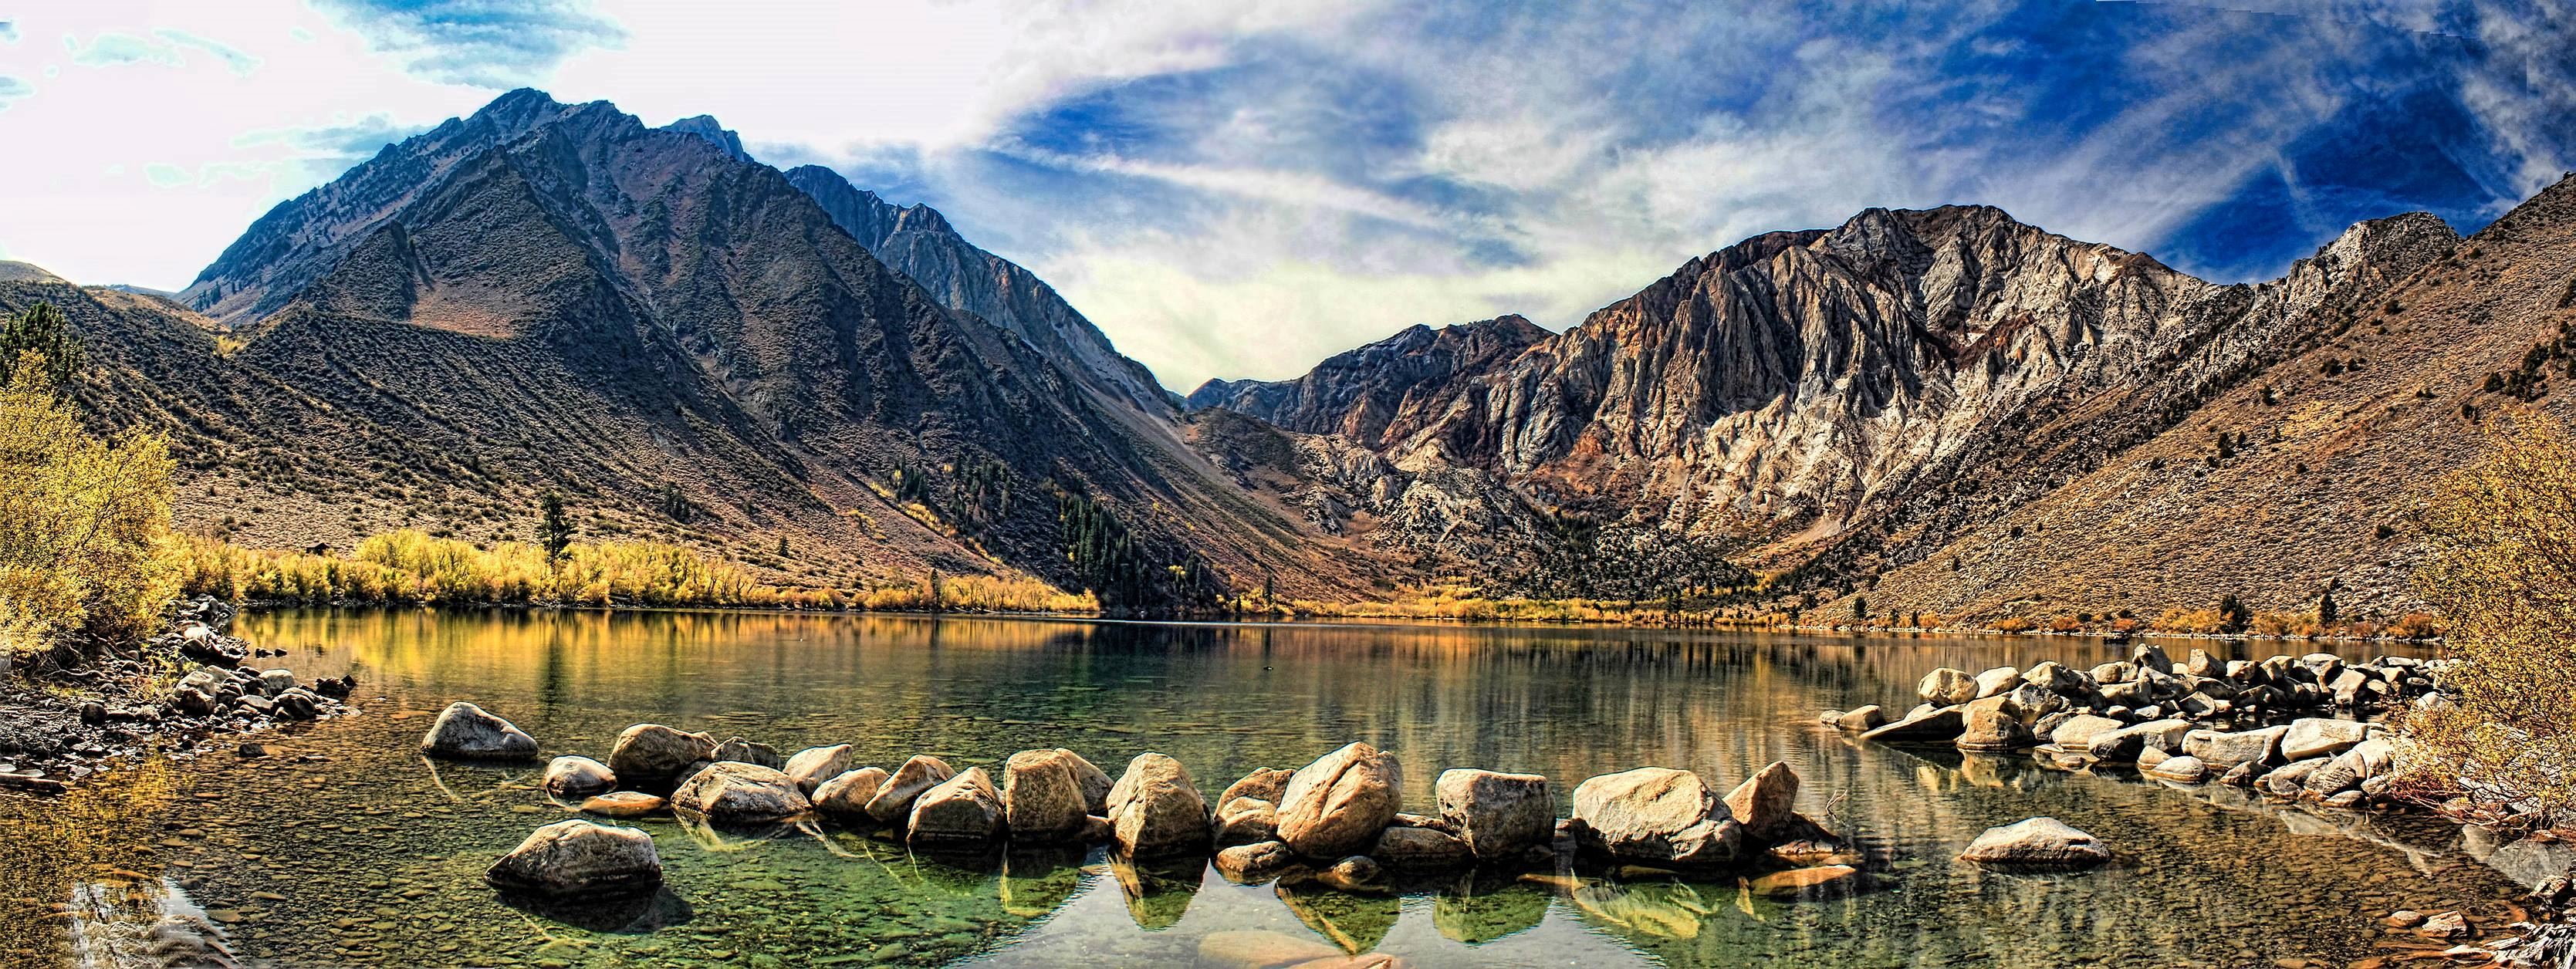 M And M Events at Convict Lake Resort - 1